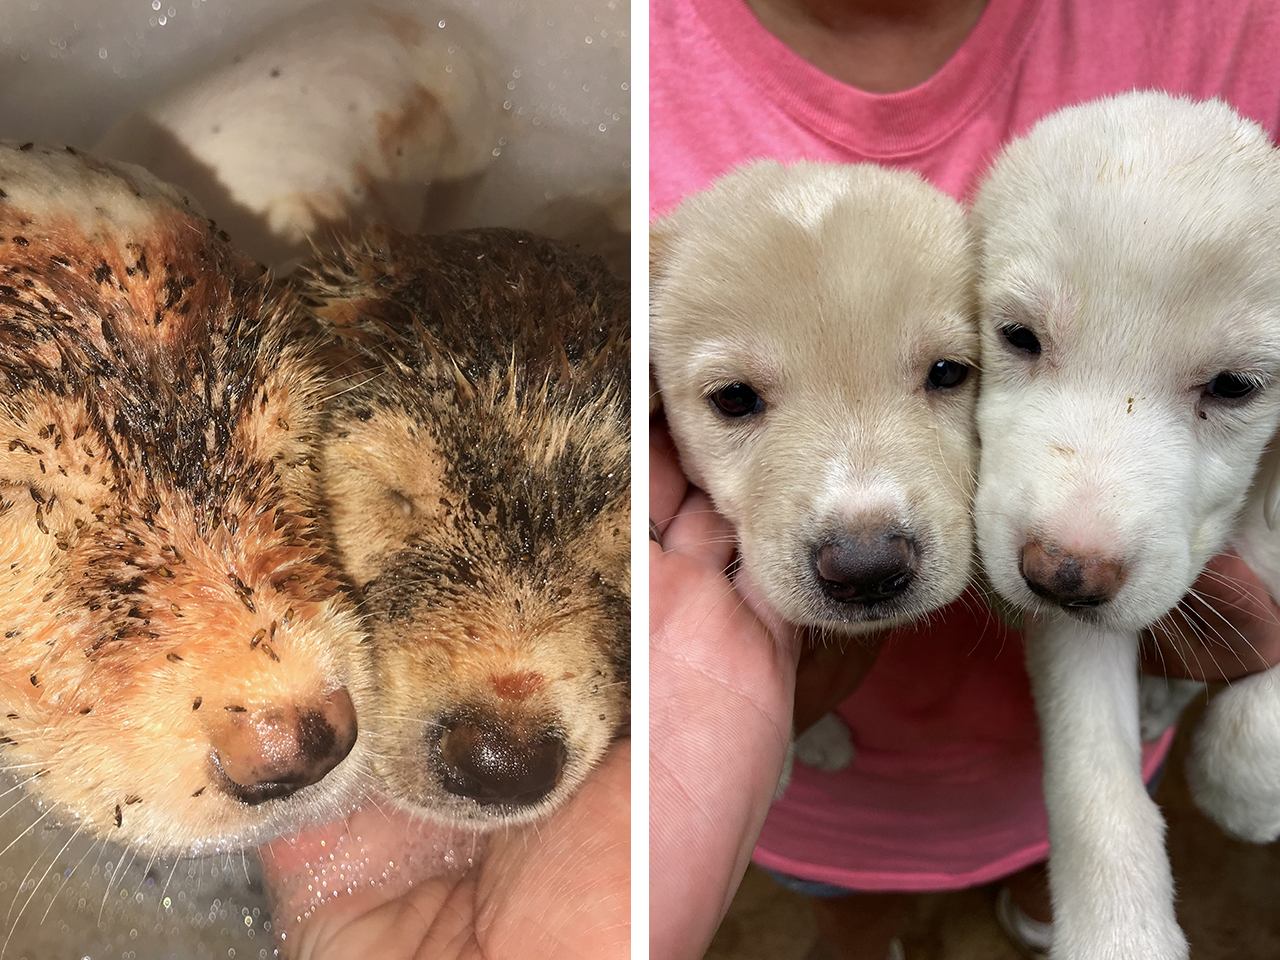 Sharon and Debbie were found as strays huddled in a culvert. Their rescuers were shocked by what they discovered on the sweet puppies. What appeared to be dirt, was actually thousands of tiny fleas, leaving them uncomfortable and at-risk. After three long baths, the sisters were finally clean and ready to cuddle.